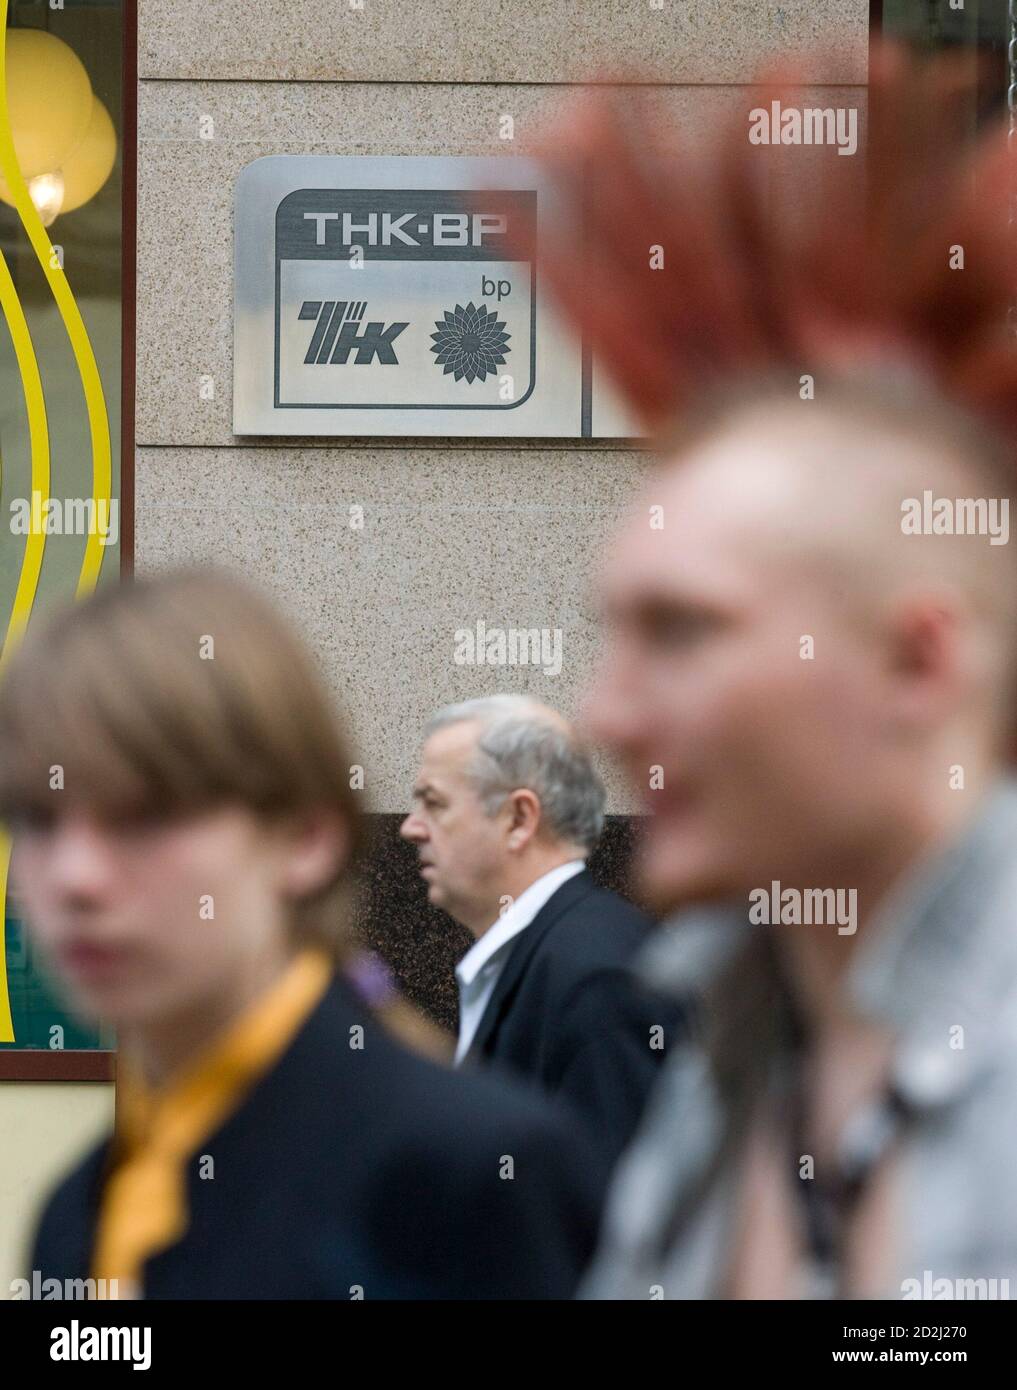 People walk past a plaque of the oil firm TNK-BP at its headquarters in Moscow June 11, 2008. The four billionaire Russian shareholders in BP's troubled Russian joint venture, TNK-BP, said on Wednesday they would sue BP in a Stockholm court and launch separate legal actions in Moscow to strip BP-nominated TNK-BP directors of their powers.   REUTERS/Sergei Karpukhin  (RUSSIA) Stock Photo